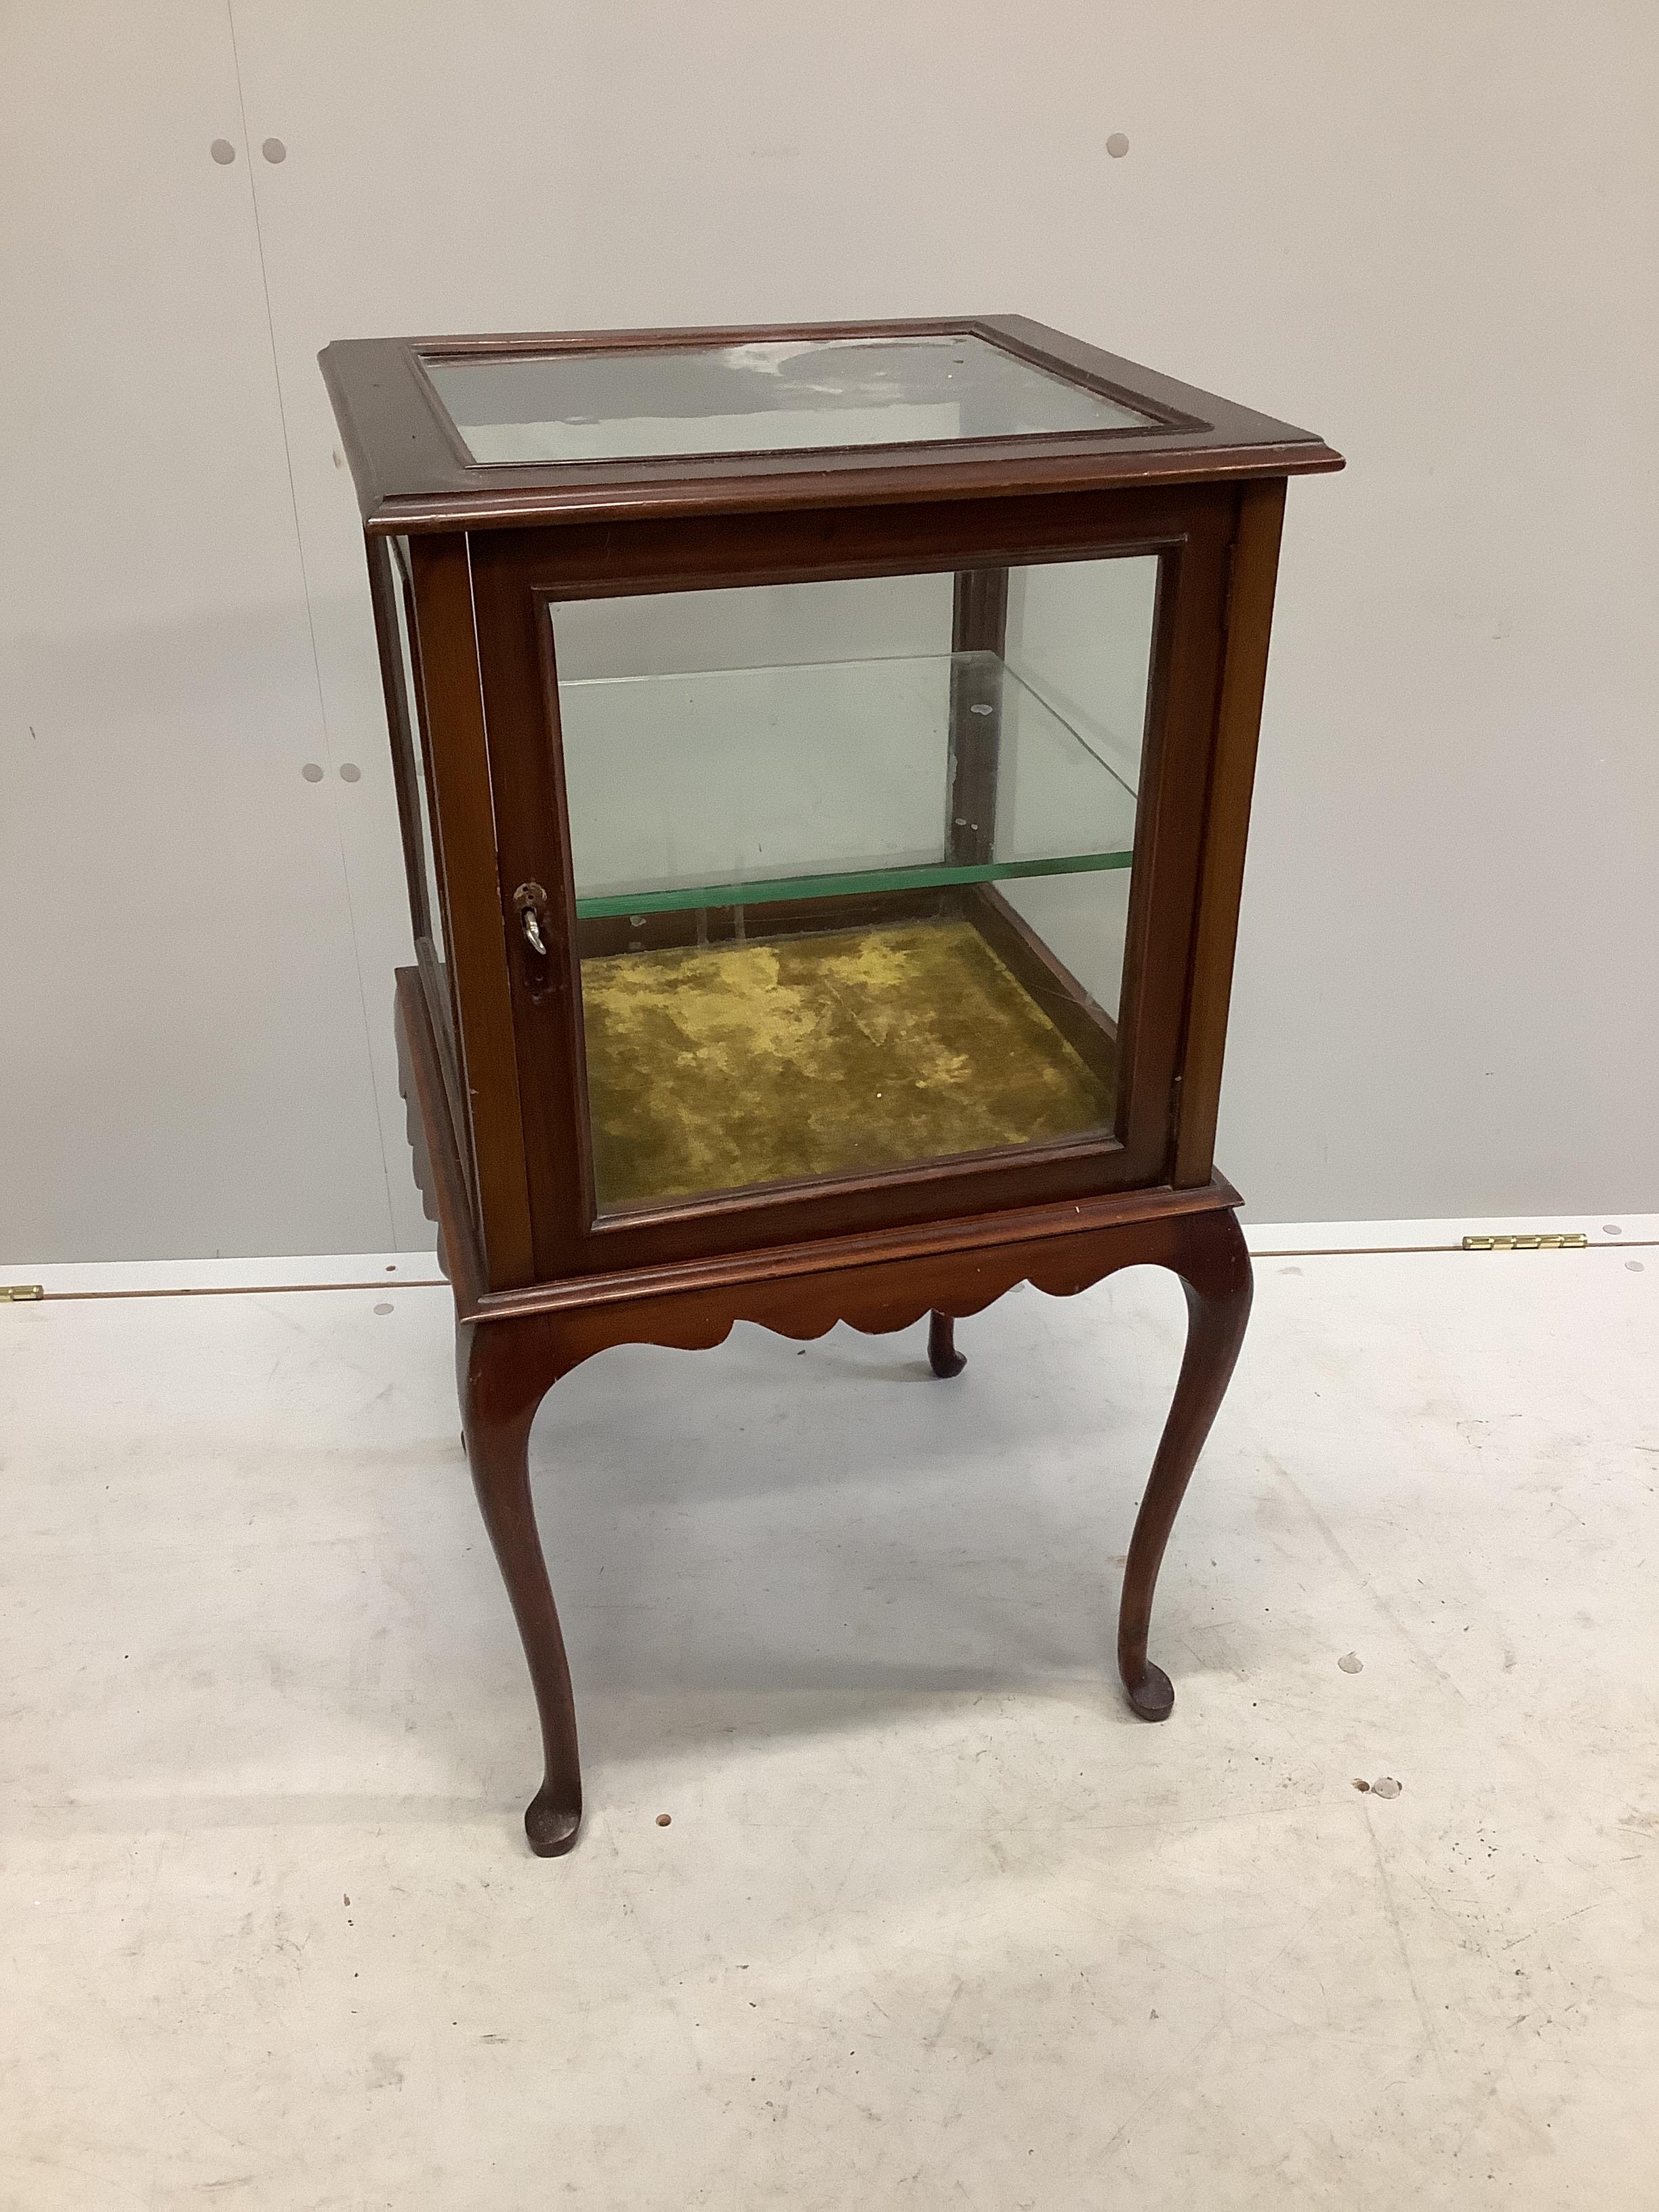 An early 20th century mahogany bijouterie cabinet, width 43cm, depth 43cm, height 82cm